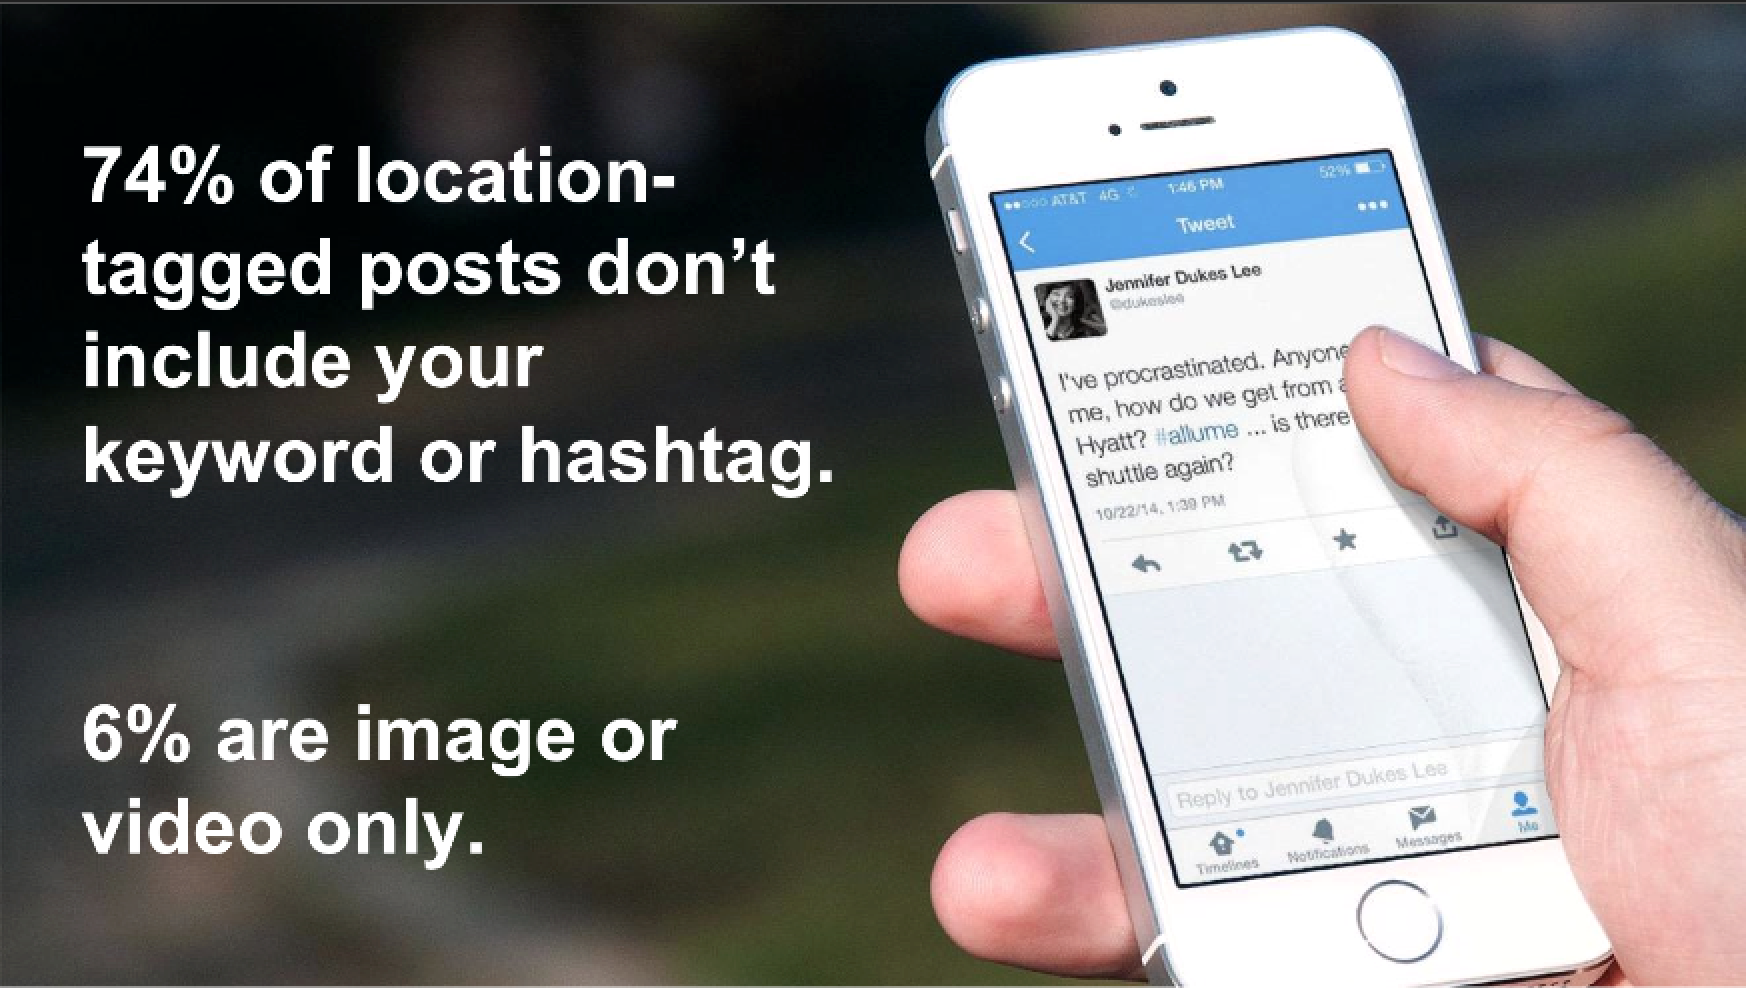 74% of Location-tagged Posted Don't Include a Keyword or Hashtag